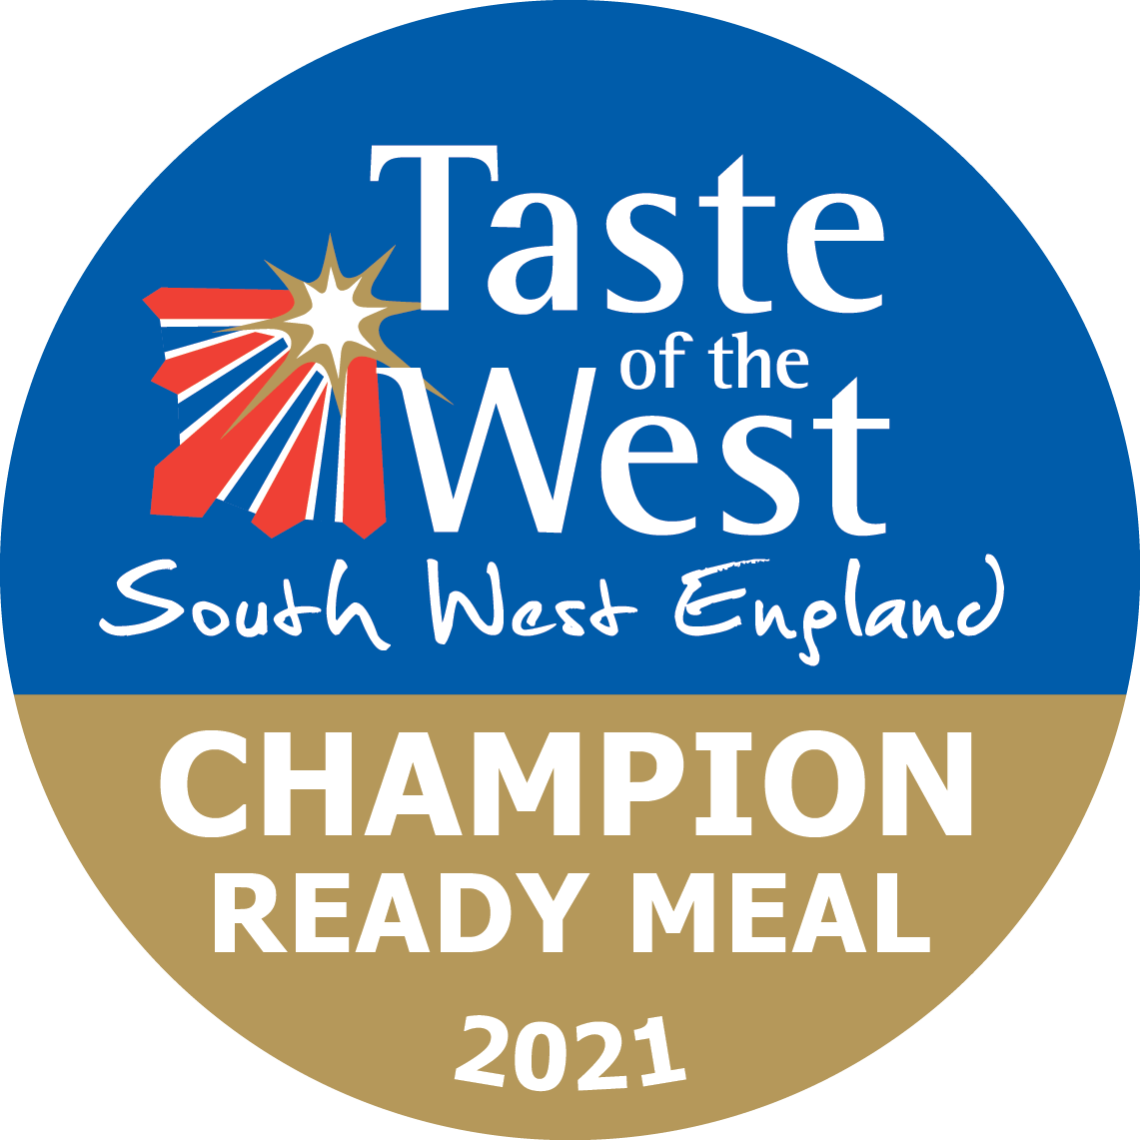 Taste of the West. Champion Ready Meal 2021